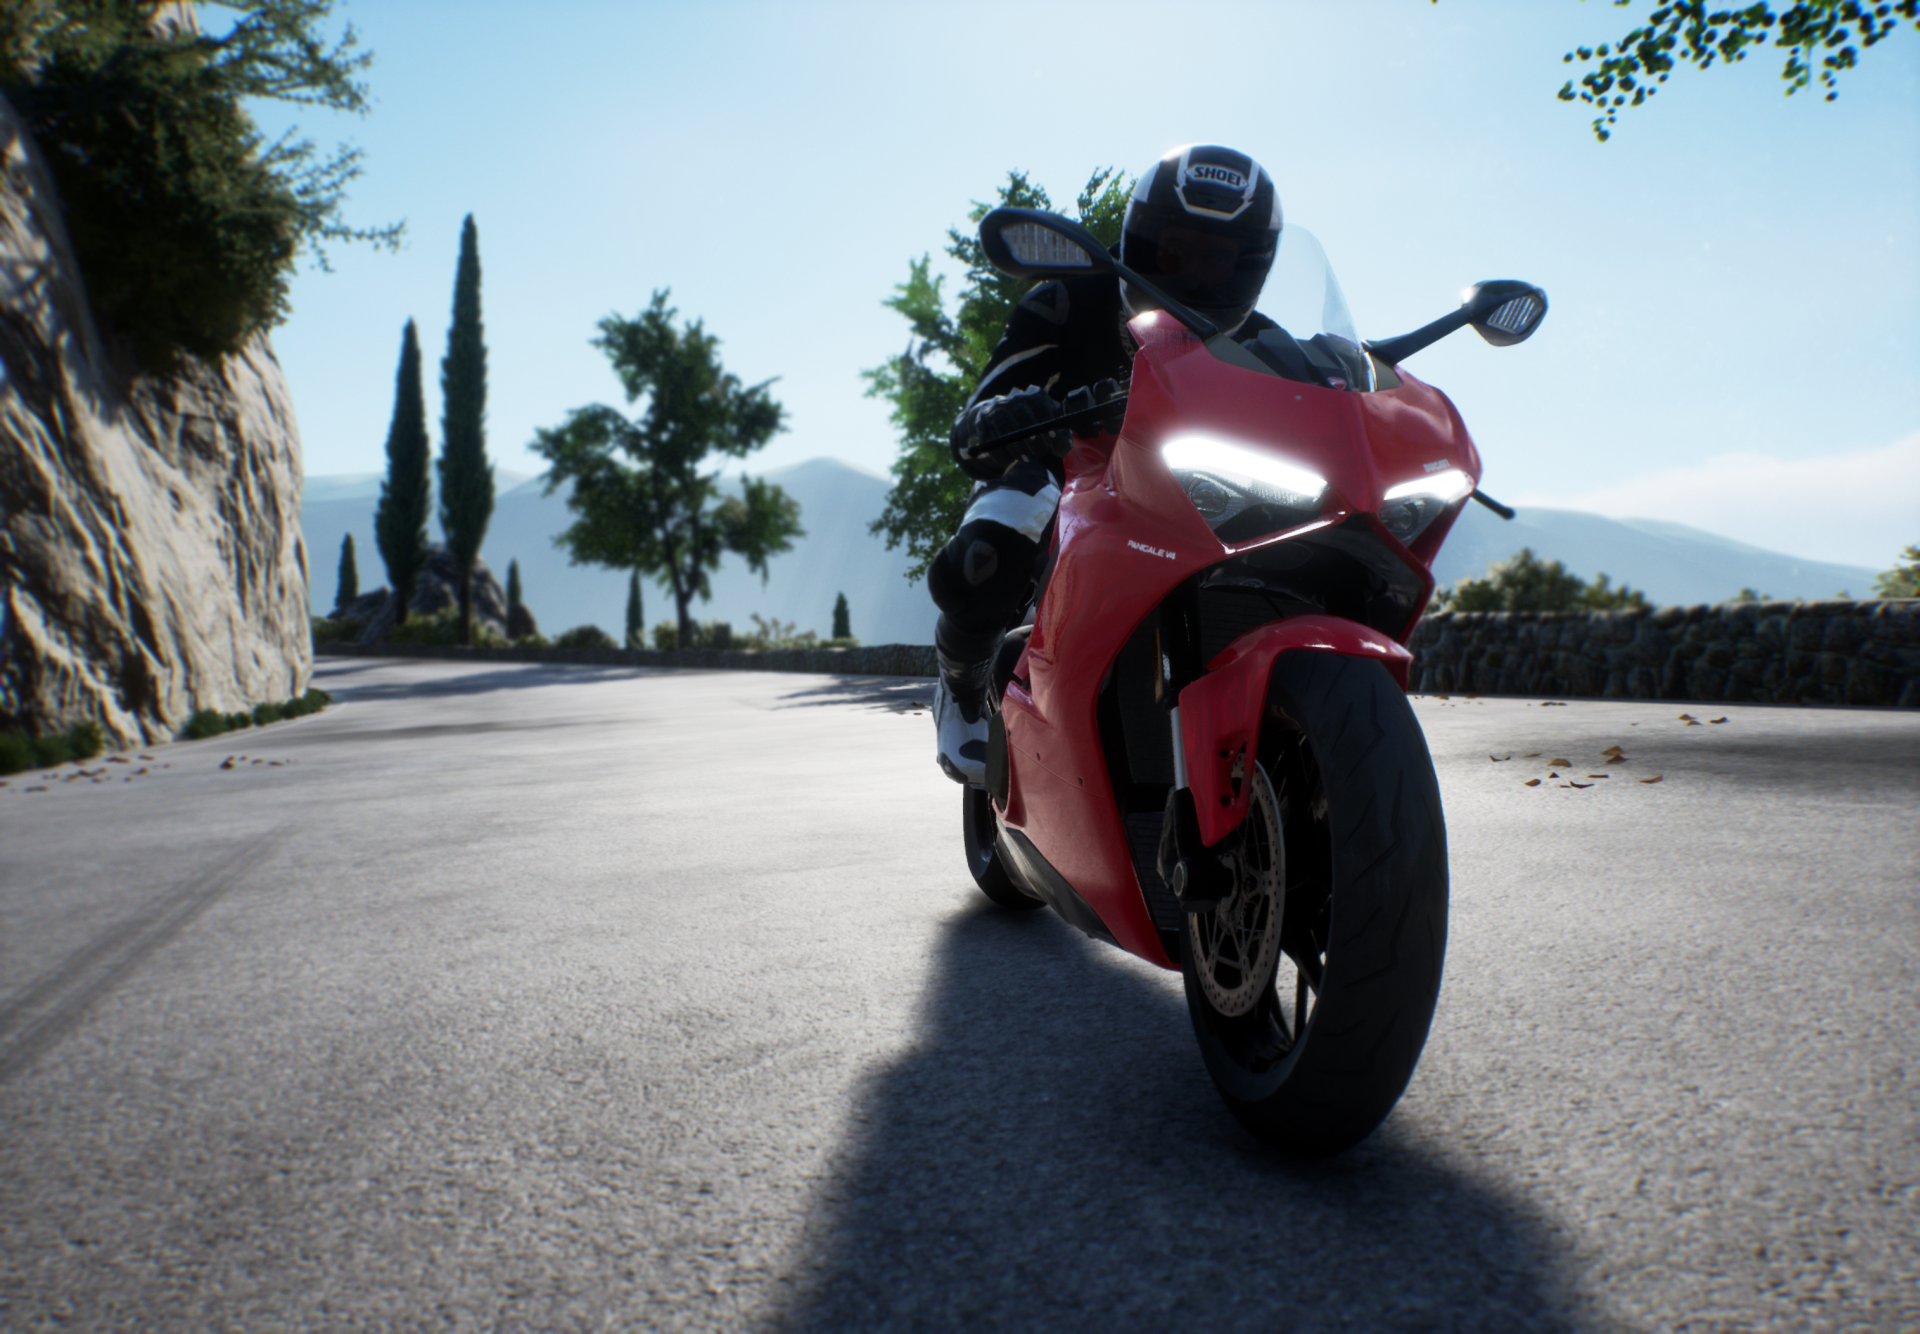 RIDE 3 PS4 Review #34